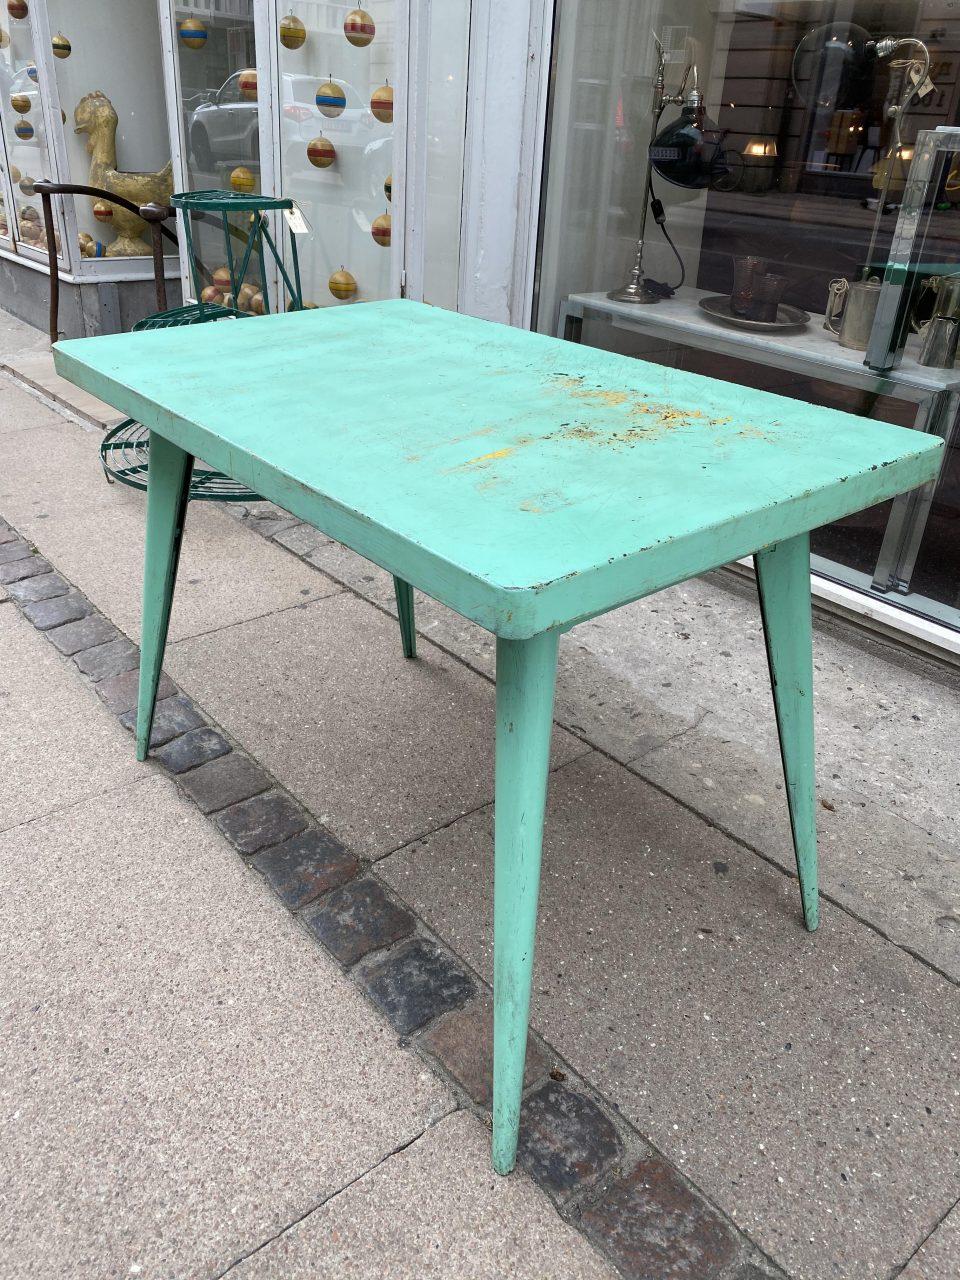 Vintage French rectangular Tolix metal table, with the characteristic oblique slanted legs. Designed by Xavier Pauchard back in the 1930s and has a beautiful patinated green blue coloured paint.

A super match with our pink Tolix table

Perfect